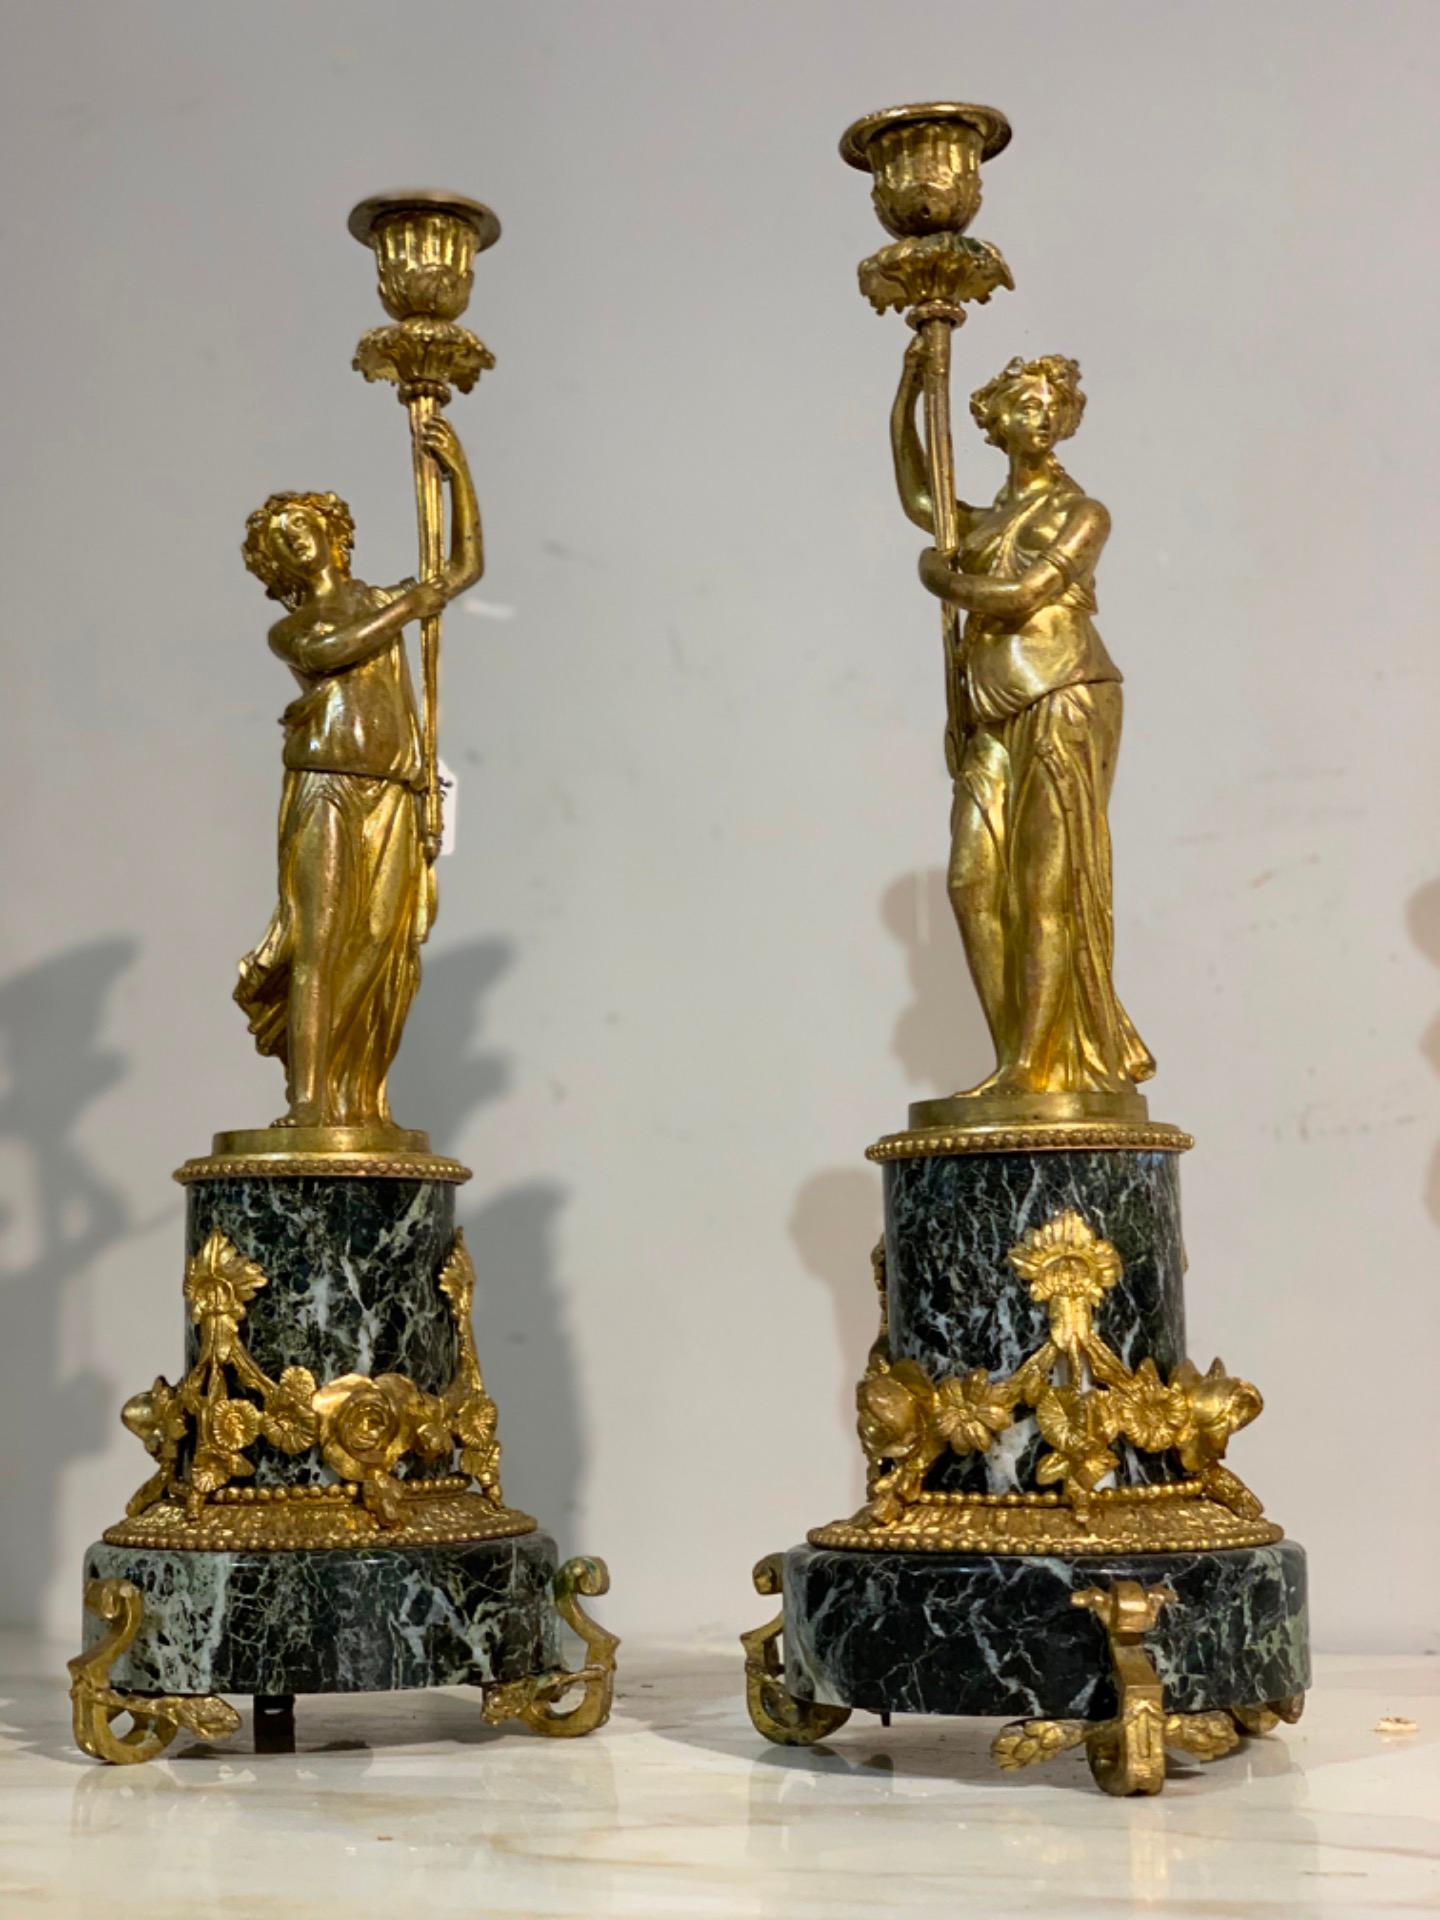 Pair of specular female figure on a green Alpi marble base finished with chiseled and gilded bronze friezes. French manufacture of the 1850/1870.